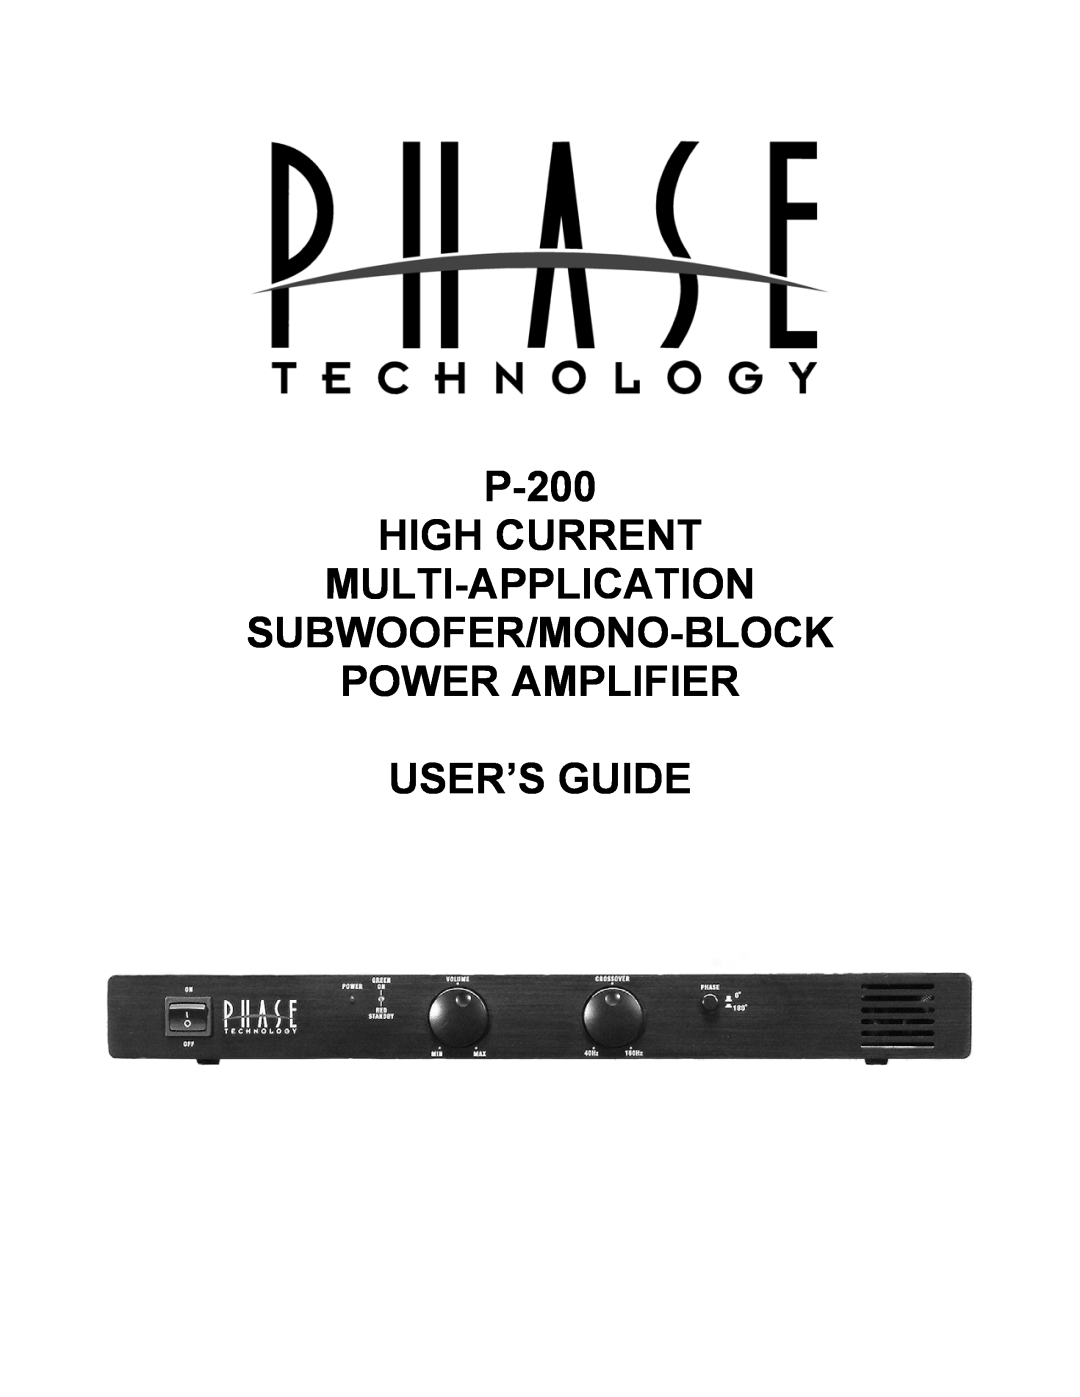 Phase Technology manual P-200 HIGH CURRENT MULTI-APPLICATION, Subwoofer/Mono-Block Power Amplifier User’S Guide 